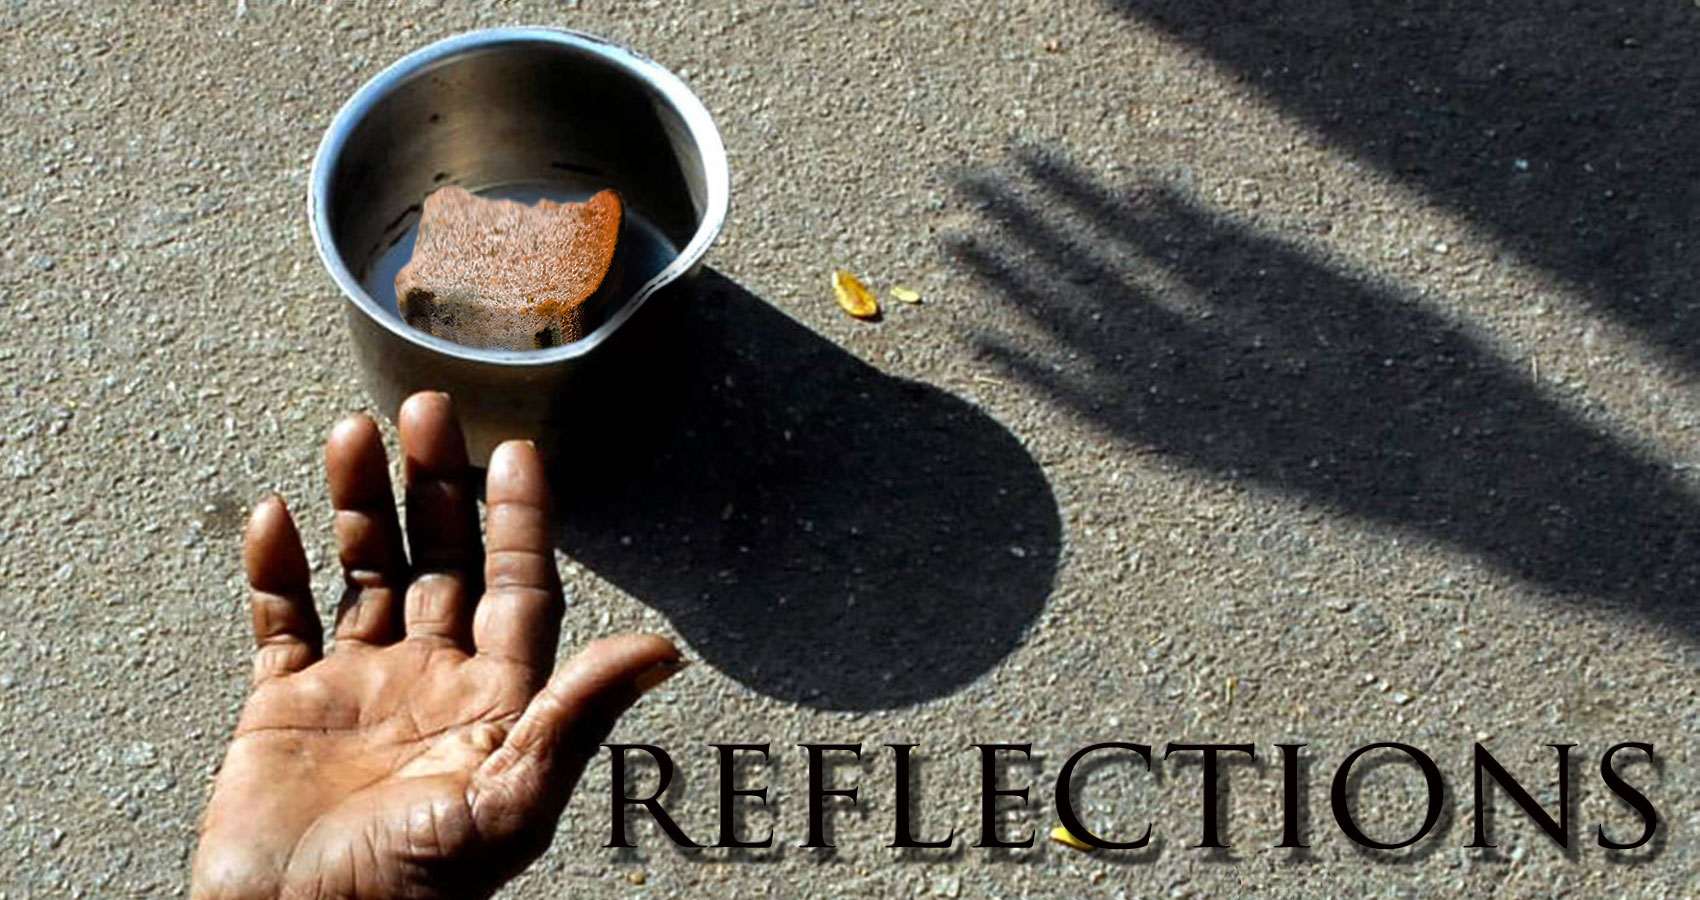 REFLECTIONS written by Dilip Mohapatra at Spillwords.com